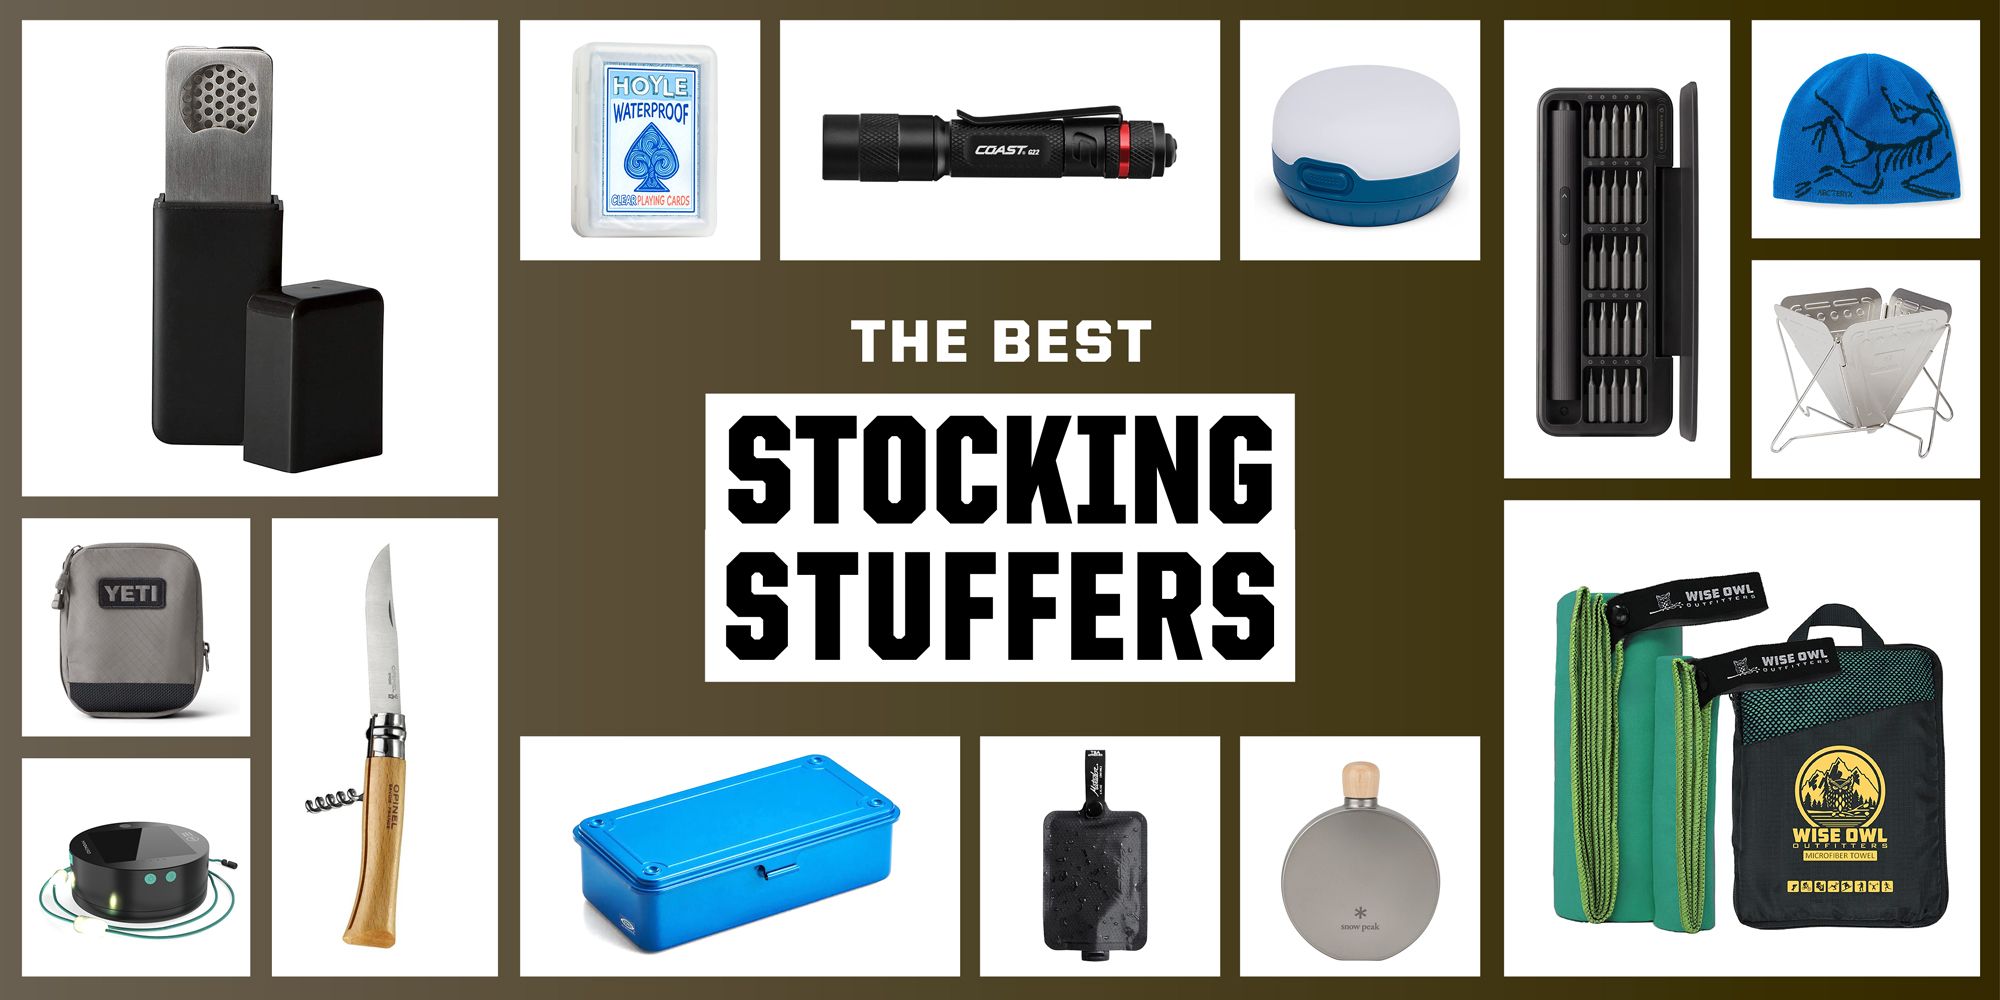 21 Perfect Stocking Stuffers for Men - Christmas Gifts for Men